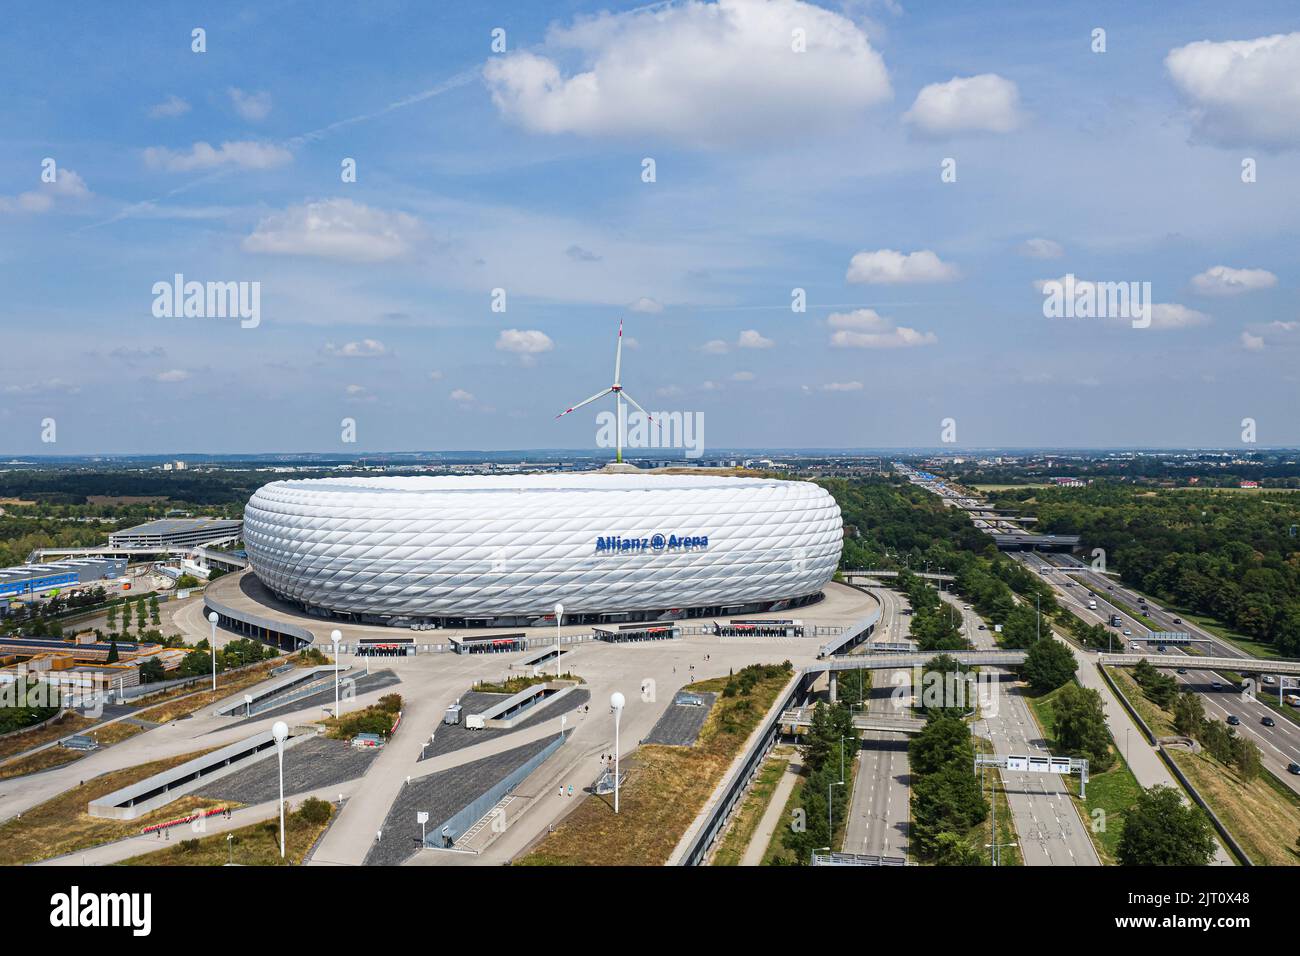 Aerial view of football stadium Allianz Arena. It designed by Herzog  de Meuron and ArupSport. MUNICH, GERMANY - AUGUST 2022 Stock Photo